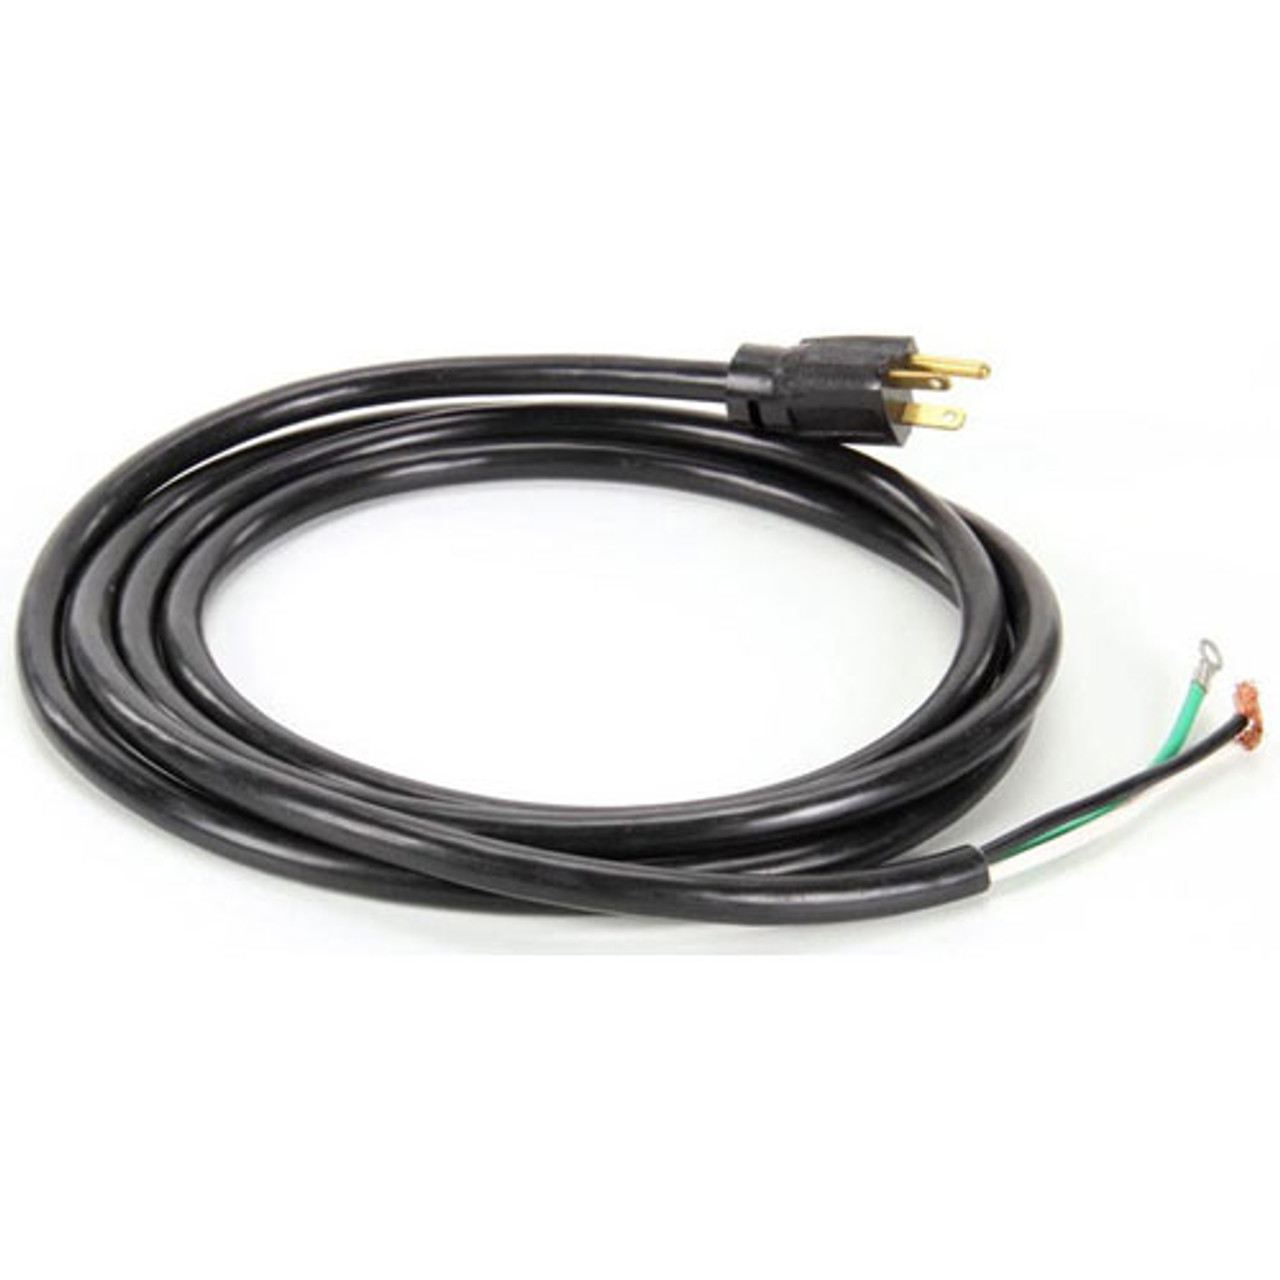 Bevles 782068 - Powercord 20A 8Ft Hc12-3